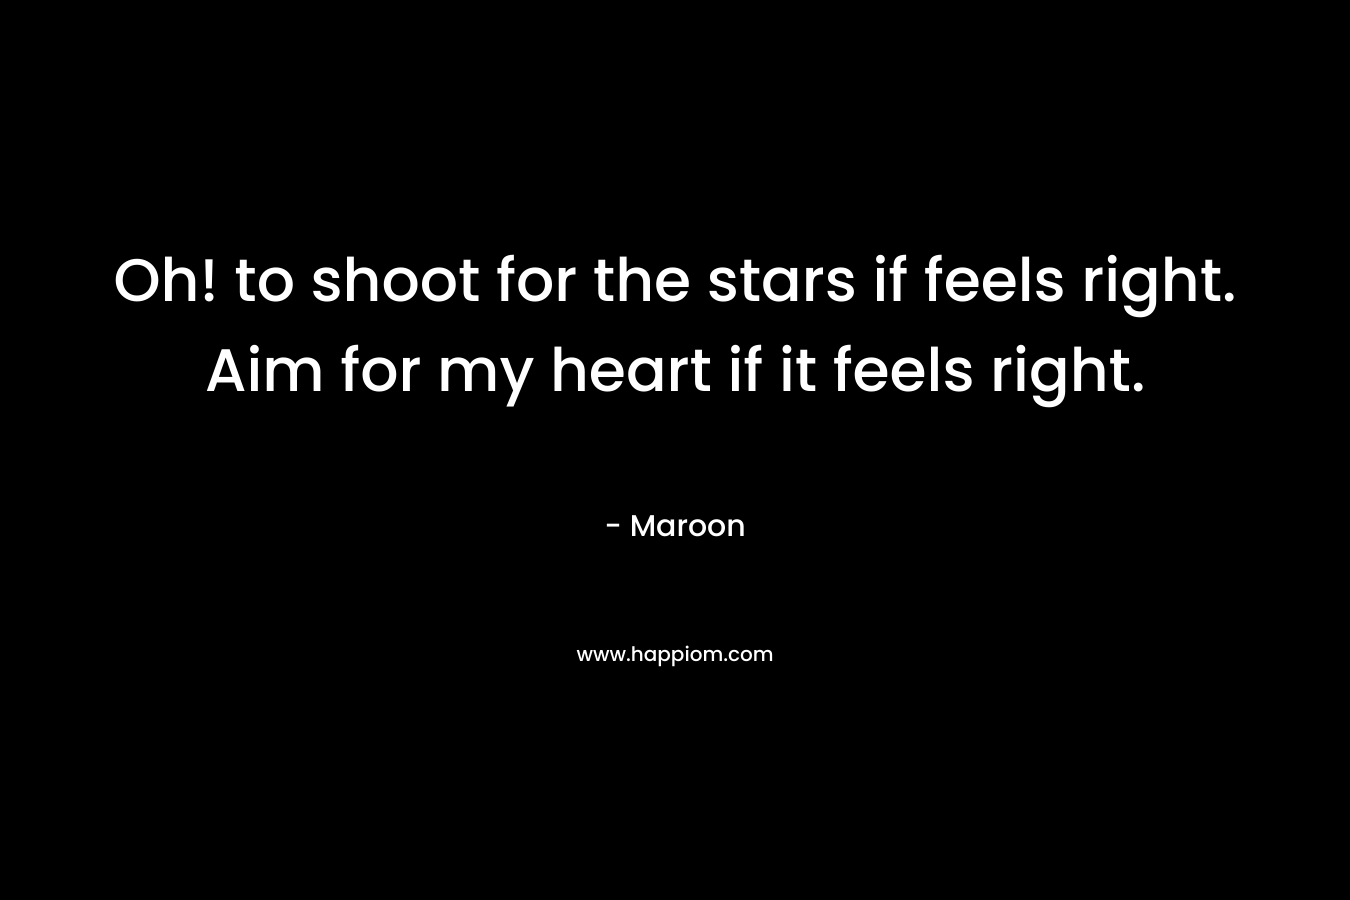 Oh! to shoot for the stars if feels right. Aim for my heart if it feels right.